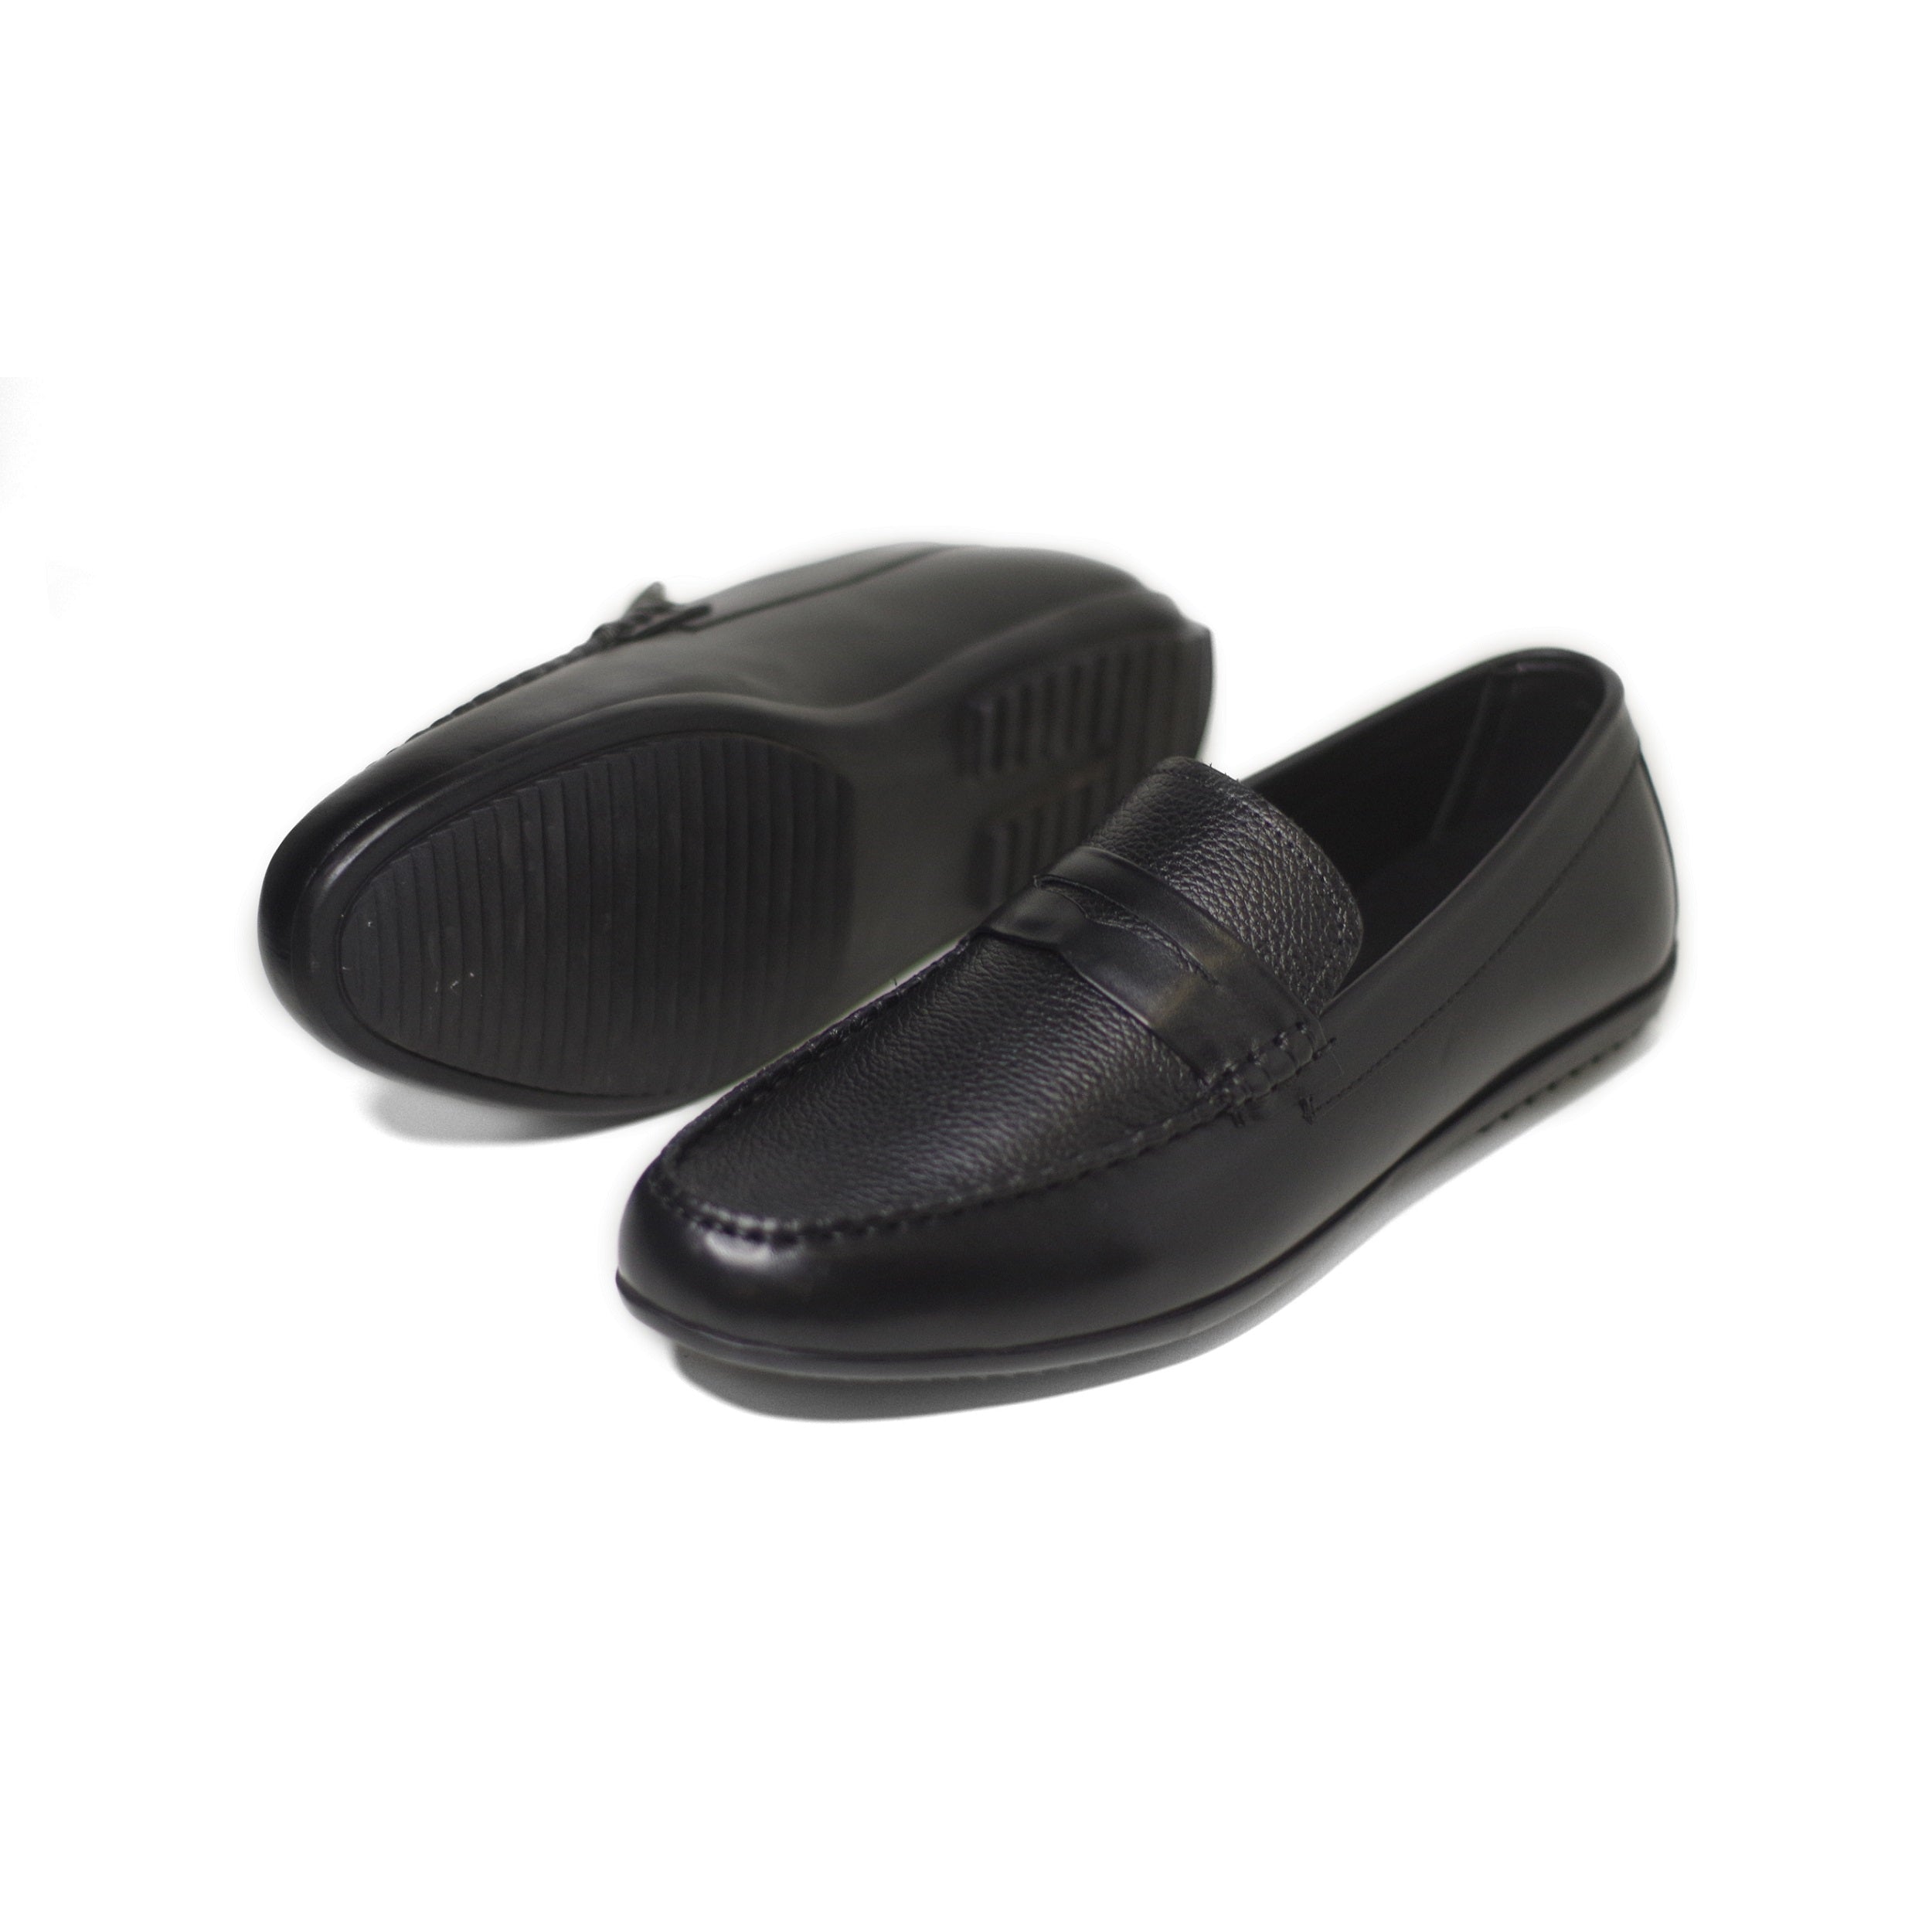 Black Grainy Leather Hand-Crafted Emperor Shoes/Loafers For Men